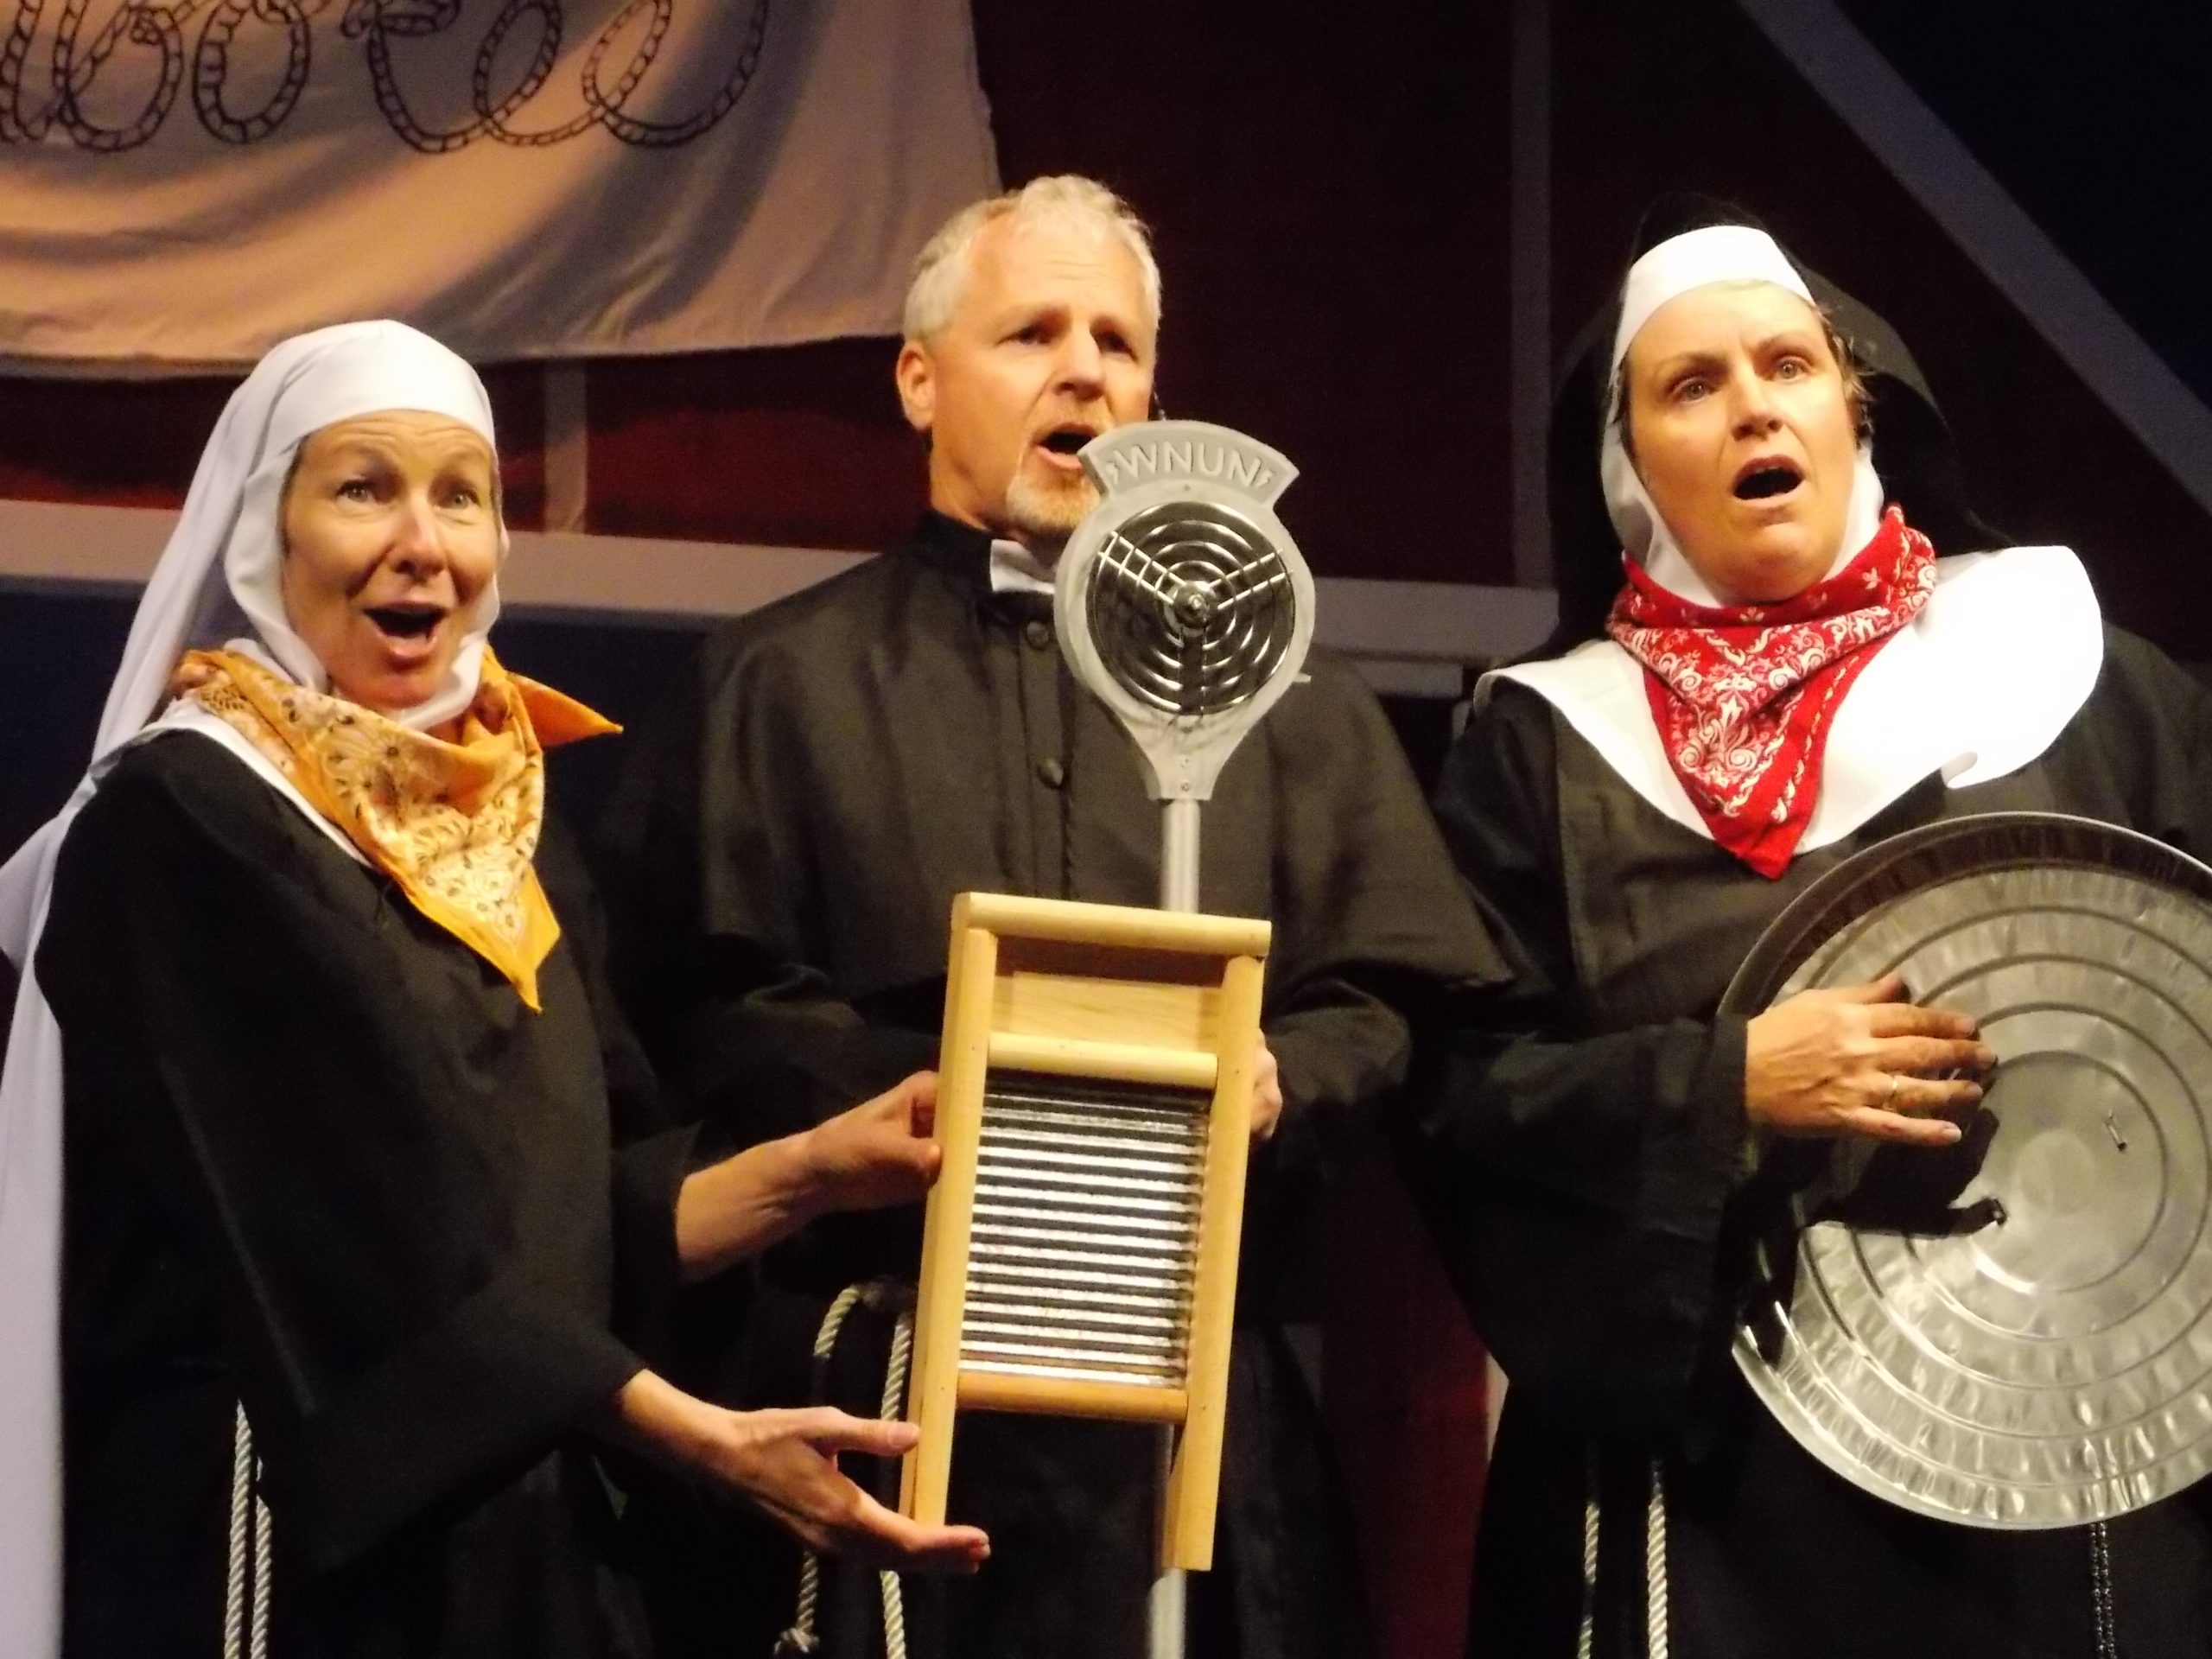 Two female actors dressed in nuns habits on either side of a male actor in a priest uniform holding a washboard